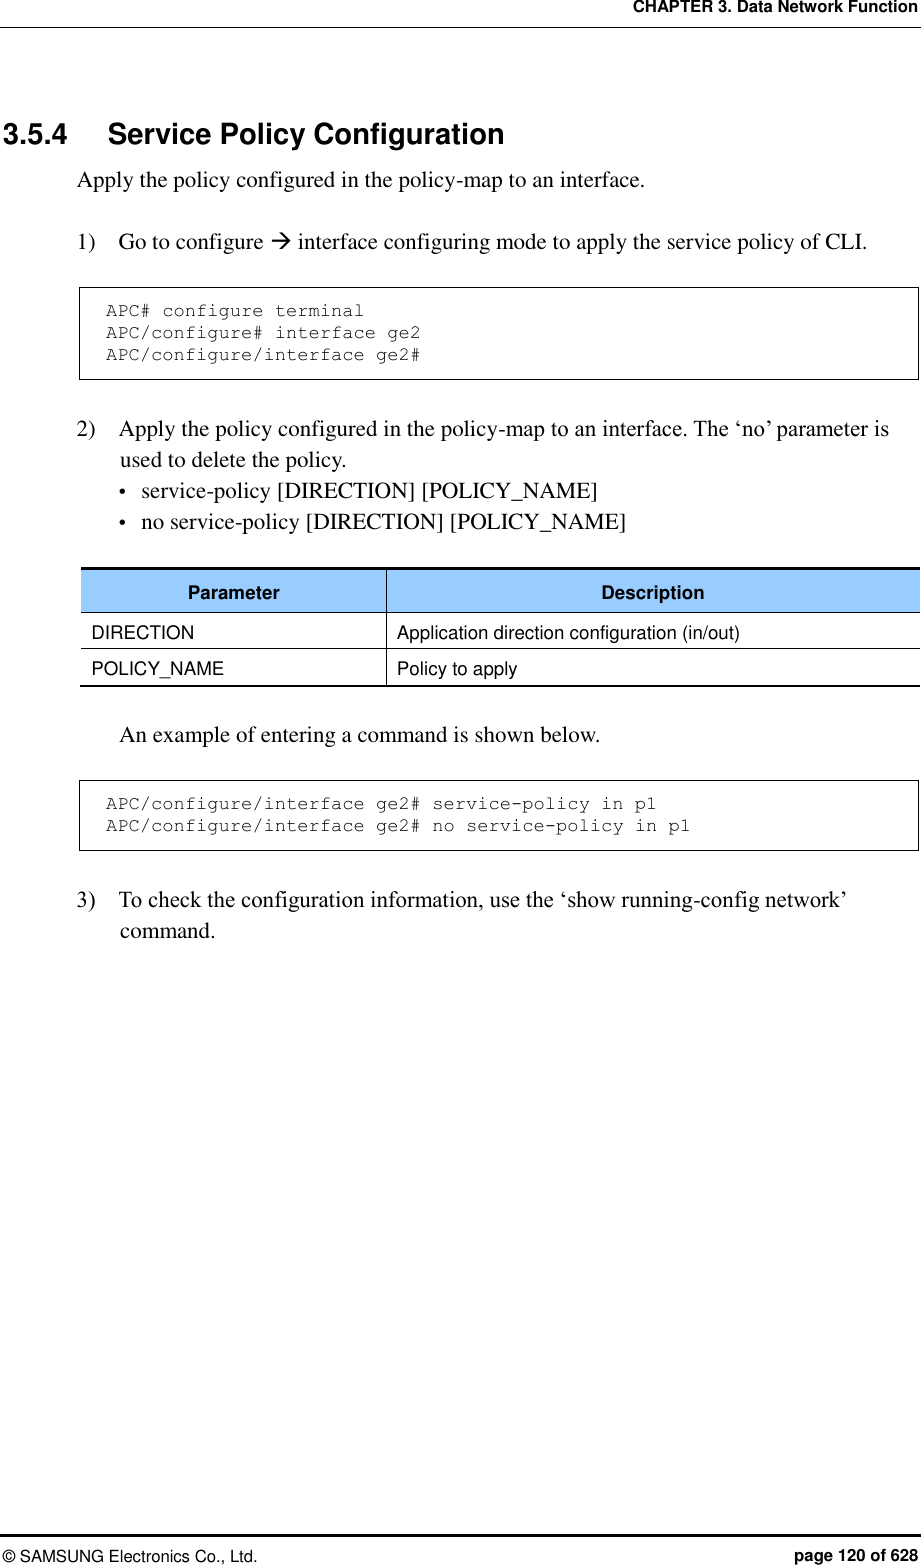 CHAPTER 3. Data Network Function ©  SAMSUNG Electronics Co., Ltd.  page 120 of 628 3.5.4  Service Policy Configuration Apply the policy configured in the policy-map to an interface.    1)    Go to configure  interface configuring mode to apply the service policy of CLI.  APC# configure terminal APC/configure# interface ge2 APC/configure/interface ge2#  2)    Apply the policy configured in the policy-map to an interface. The ‘no’ parameter is used to delete the policy.  service-policy [DIRECTION] [POLICY_NAME]  no service-policy [DIRECTION] [POLICY_NAME]  Parameter Description DIRECTION Application direction configuration (in/out) POLICY_NAME Policy to apply  An example of entering a command is shown below.  APC/configure/interface ge2# service-policy in p1 APC/configure/interface ge2# no service-policy in p1  3)    To check the configuration information, use the ‘show running-config network’ command.  